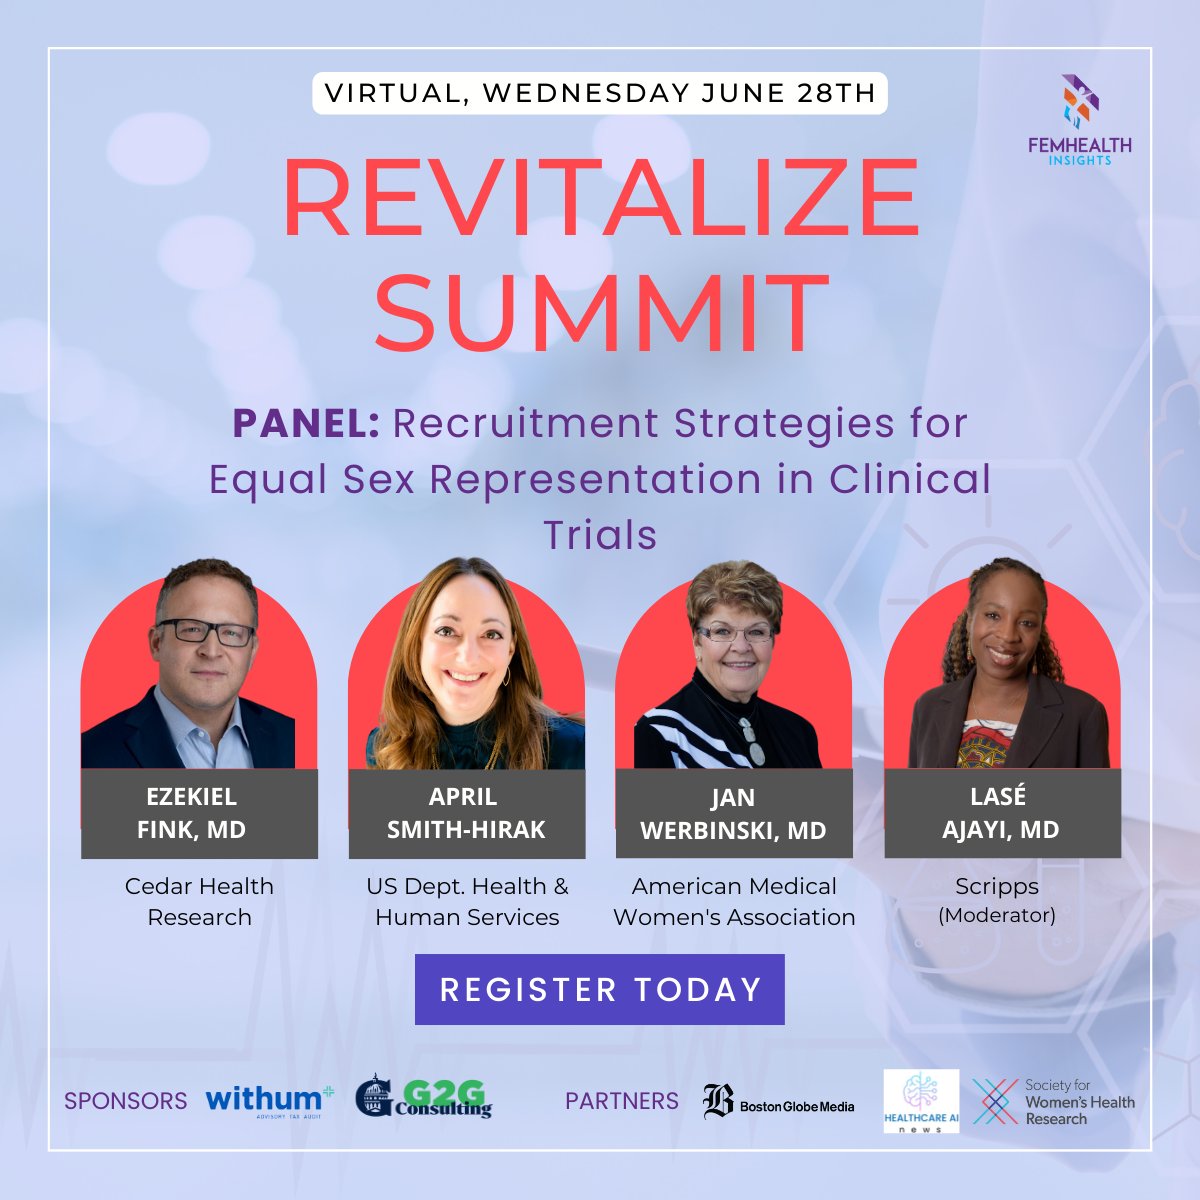 In 1977, the FDA recommended excluding women of reproductive age from clinical trials due to the Thalidomide crisis. While that decision was reversed in 1993 with the REVITALIZATION ACT, women are still significantly underrepresented.

Register today! ➡️ bit.ly/3N7gDZl